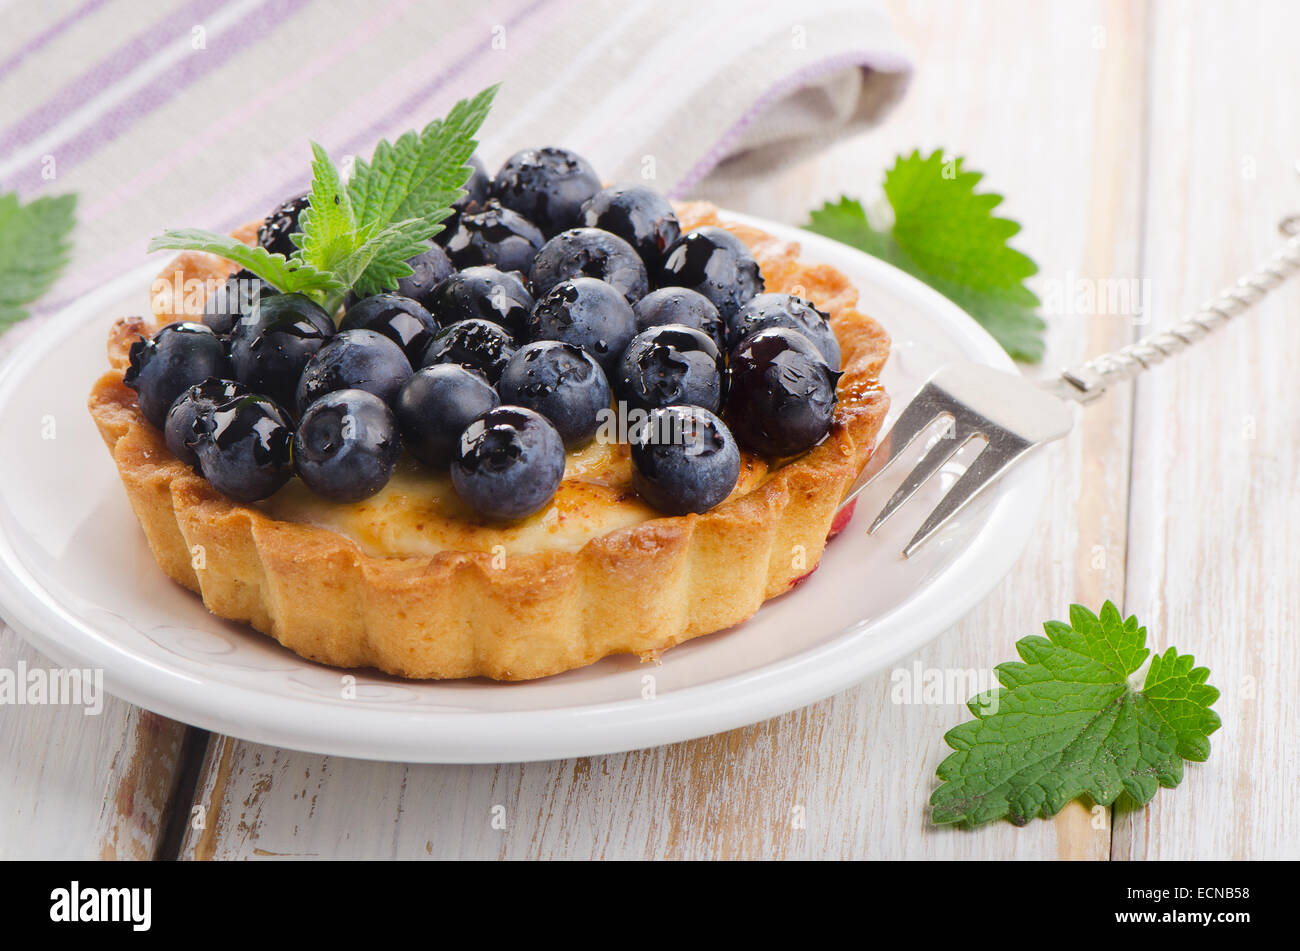 Fresh Blueberry tart on a white plate. Selective focus Stock Photo